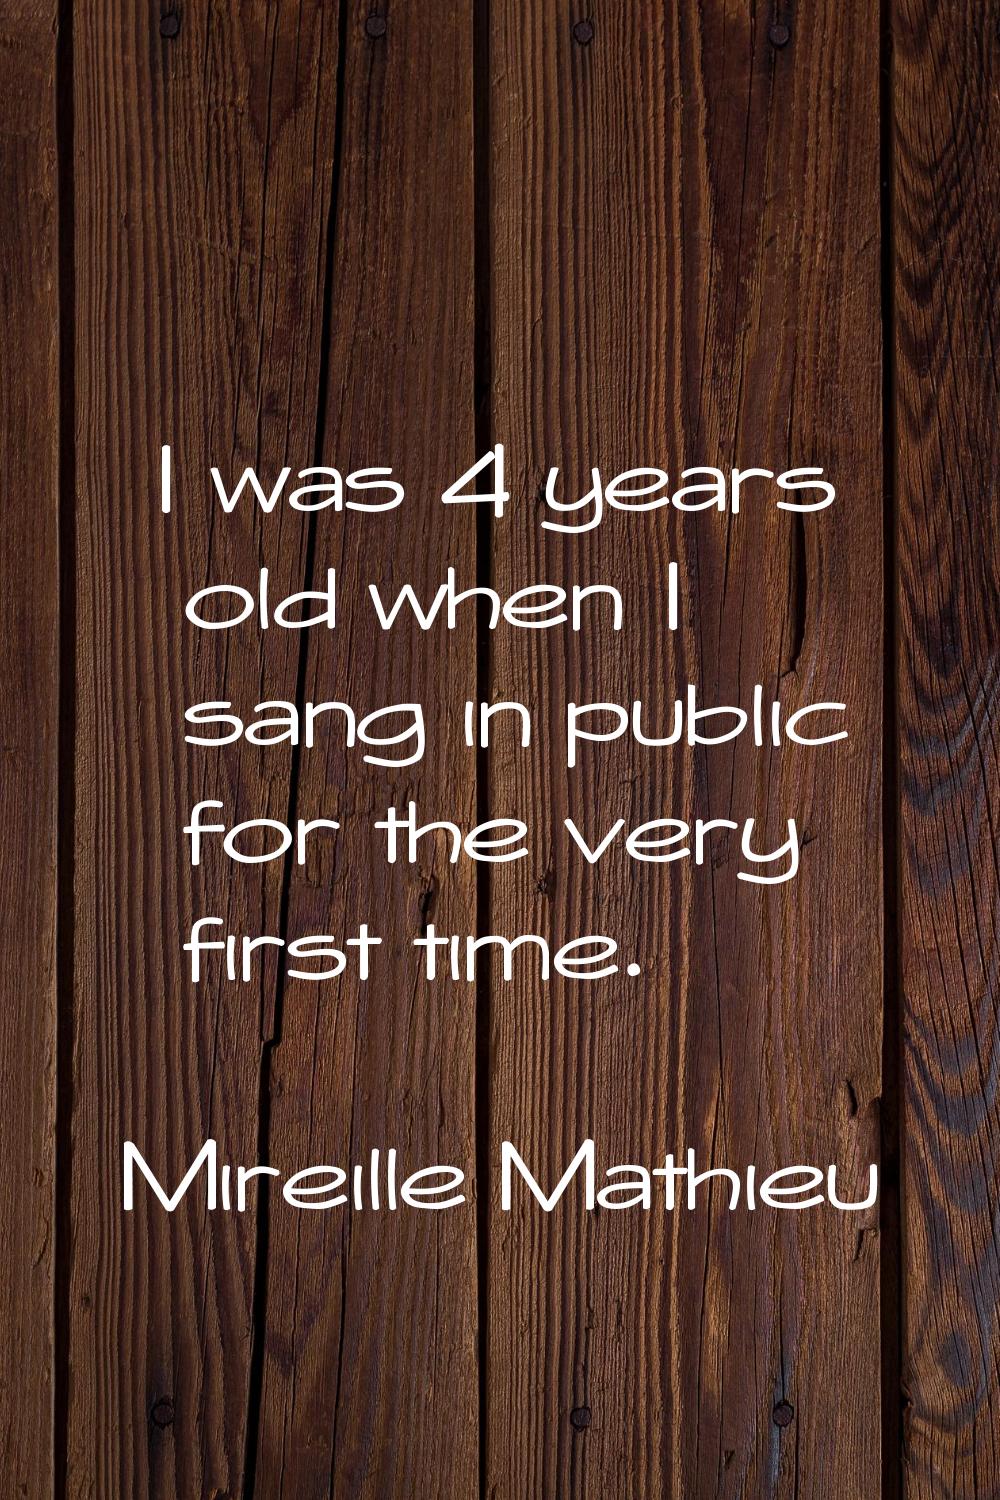 I was 4 years old when I sang in public for the very first time.